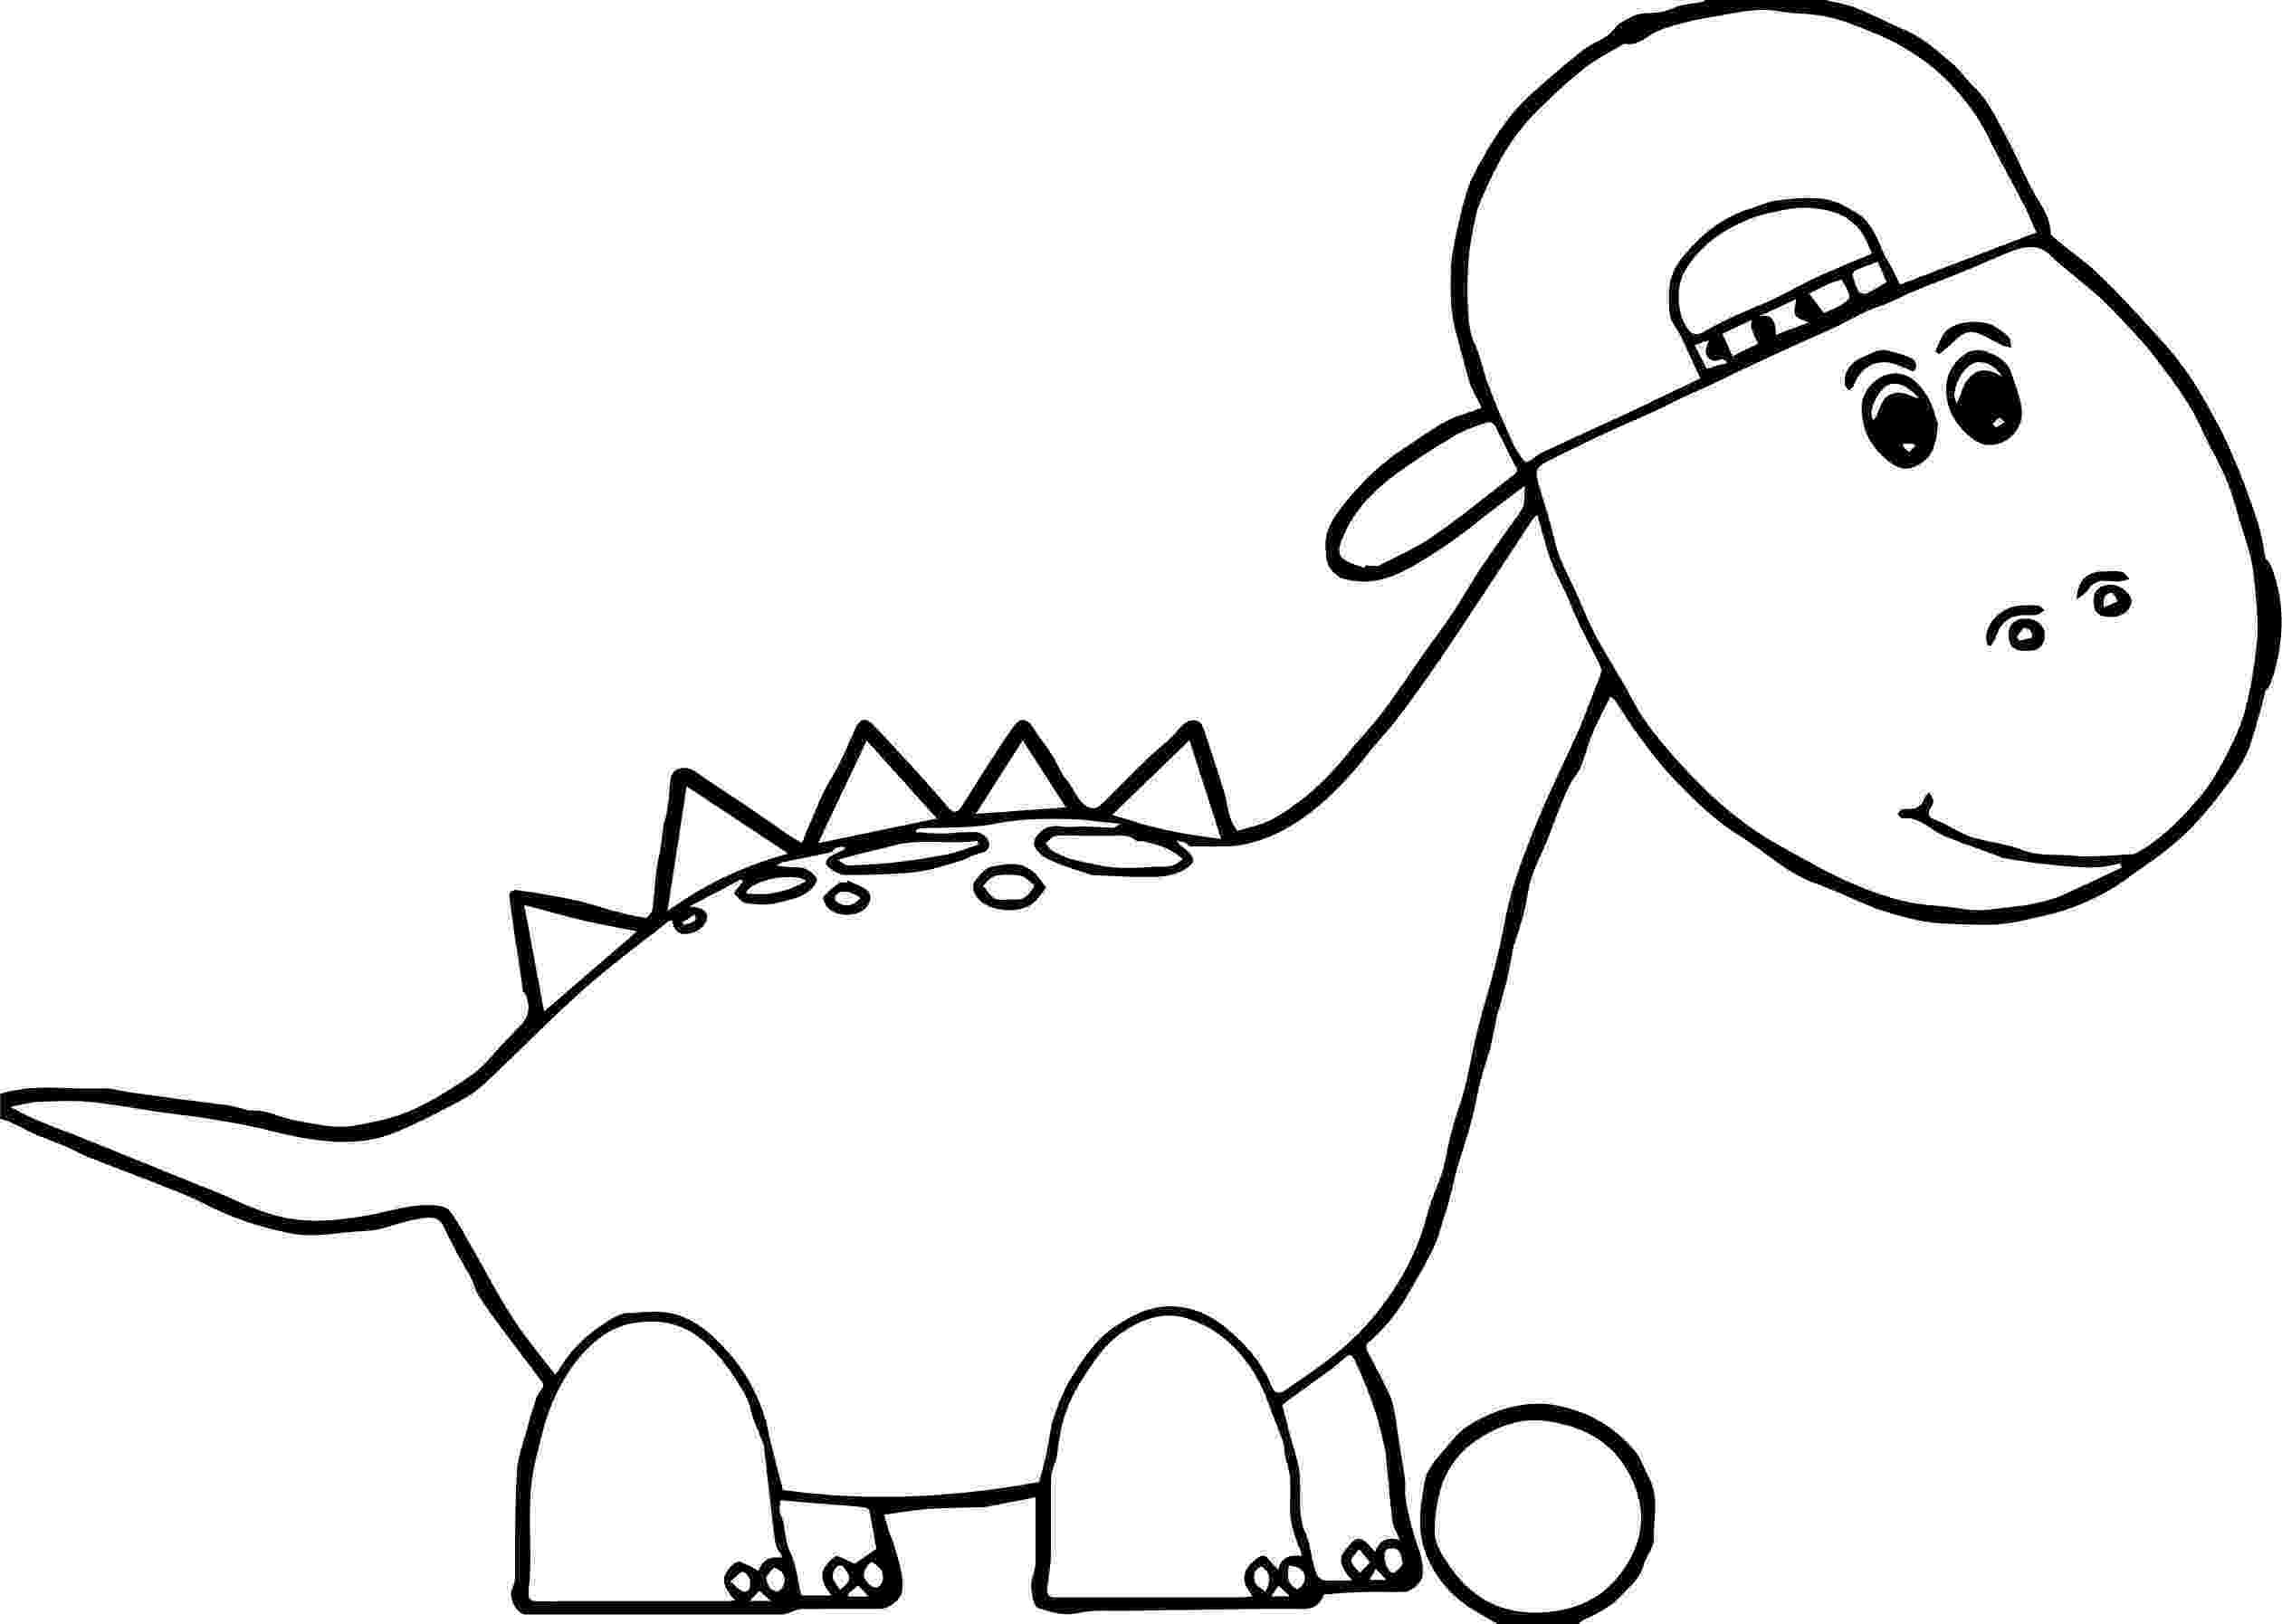 dinosaur egg coloring page dinosaur egg coloring page free download on clipartmag egg dinosaur page coloring 